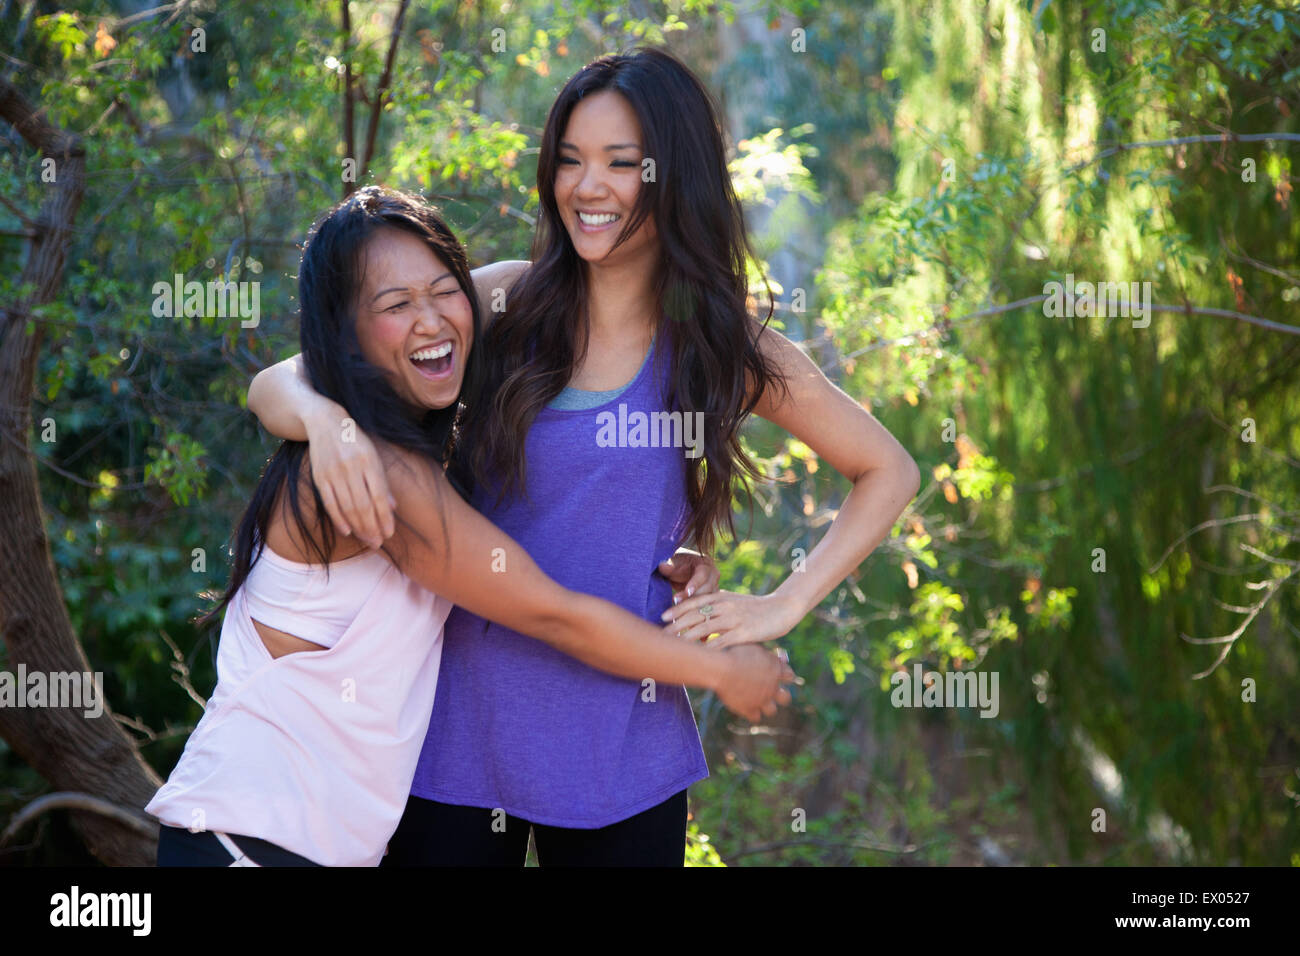 Two mid adult women fooling around in rural setting Stock Photo